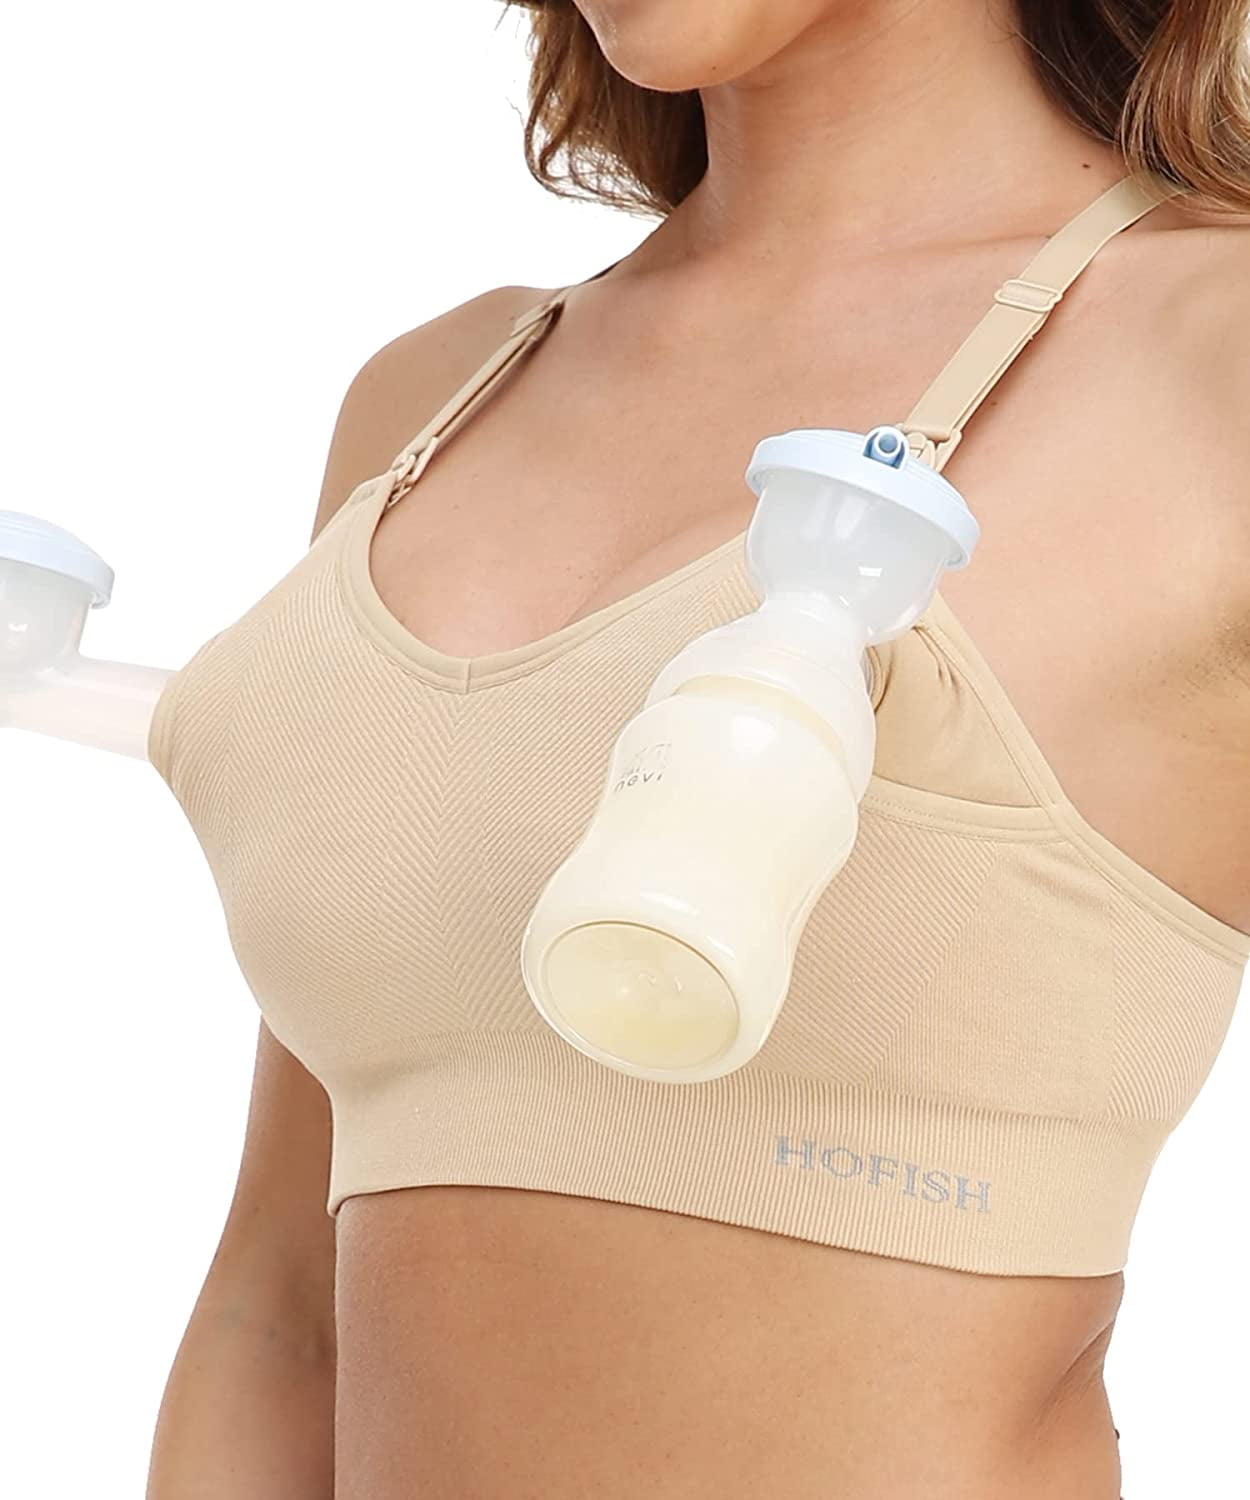 4HOW Pumping Bra Hands Free Maternity Bras for Breastfeeding Pumping and  Nursing Bra in One Comfort Smooth - ShopStyle